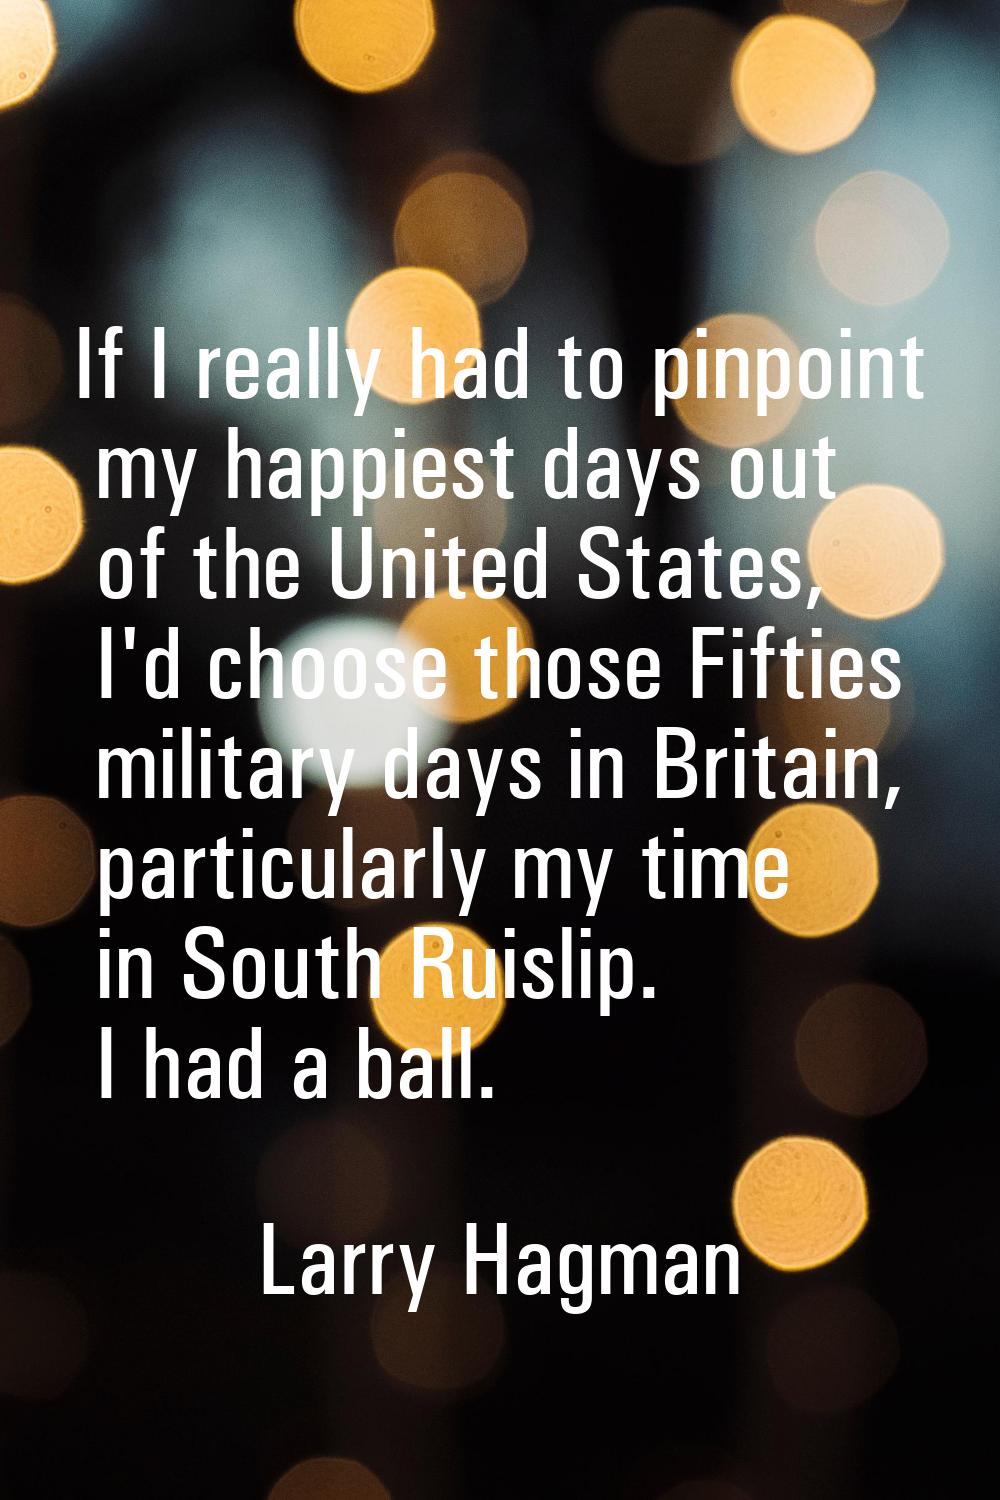 If I really had to pinpoint my happiest days out of the United States, I'd choose those Fifties mil